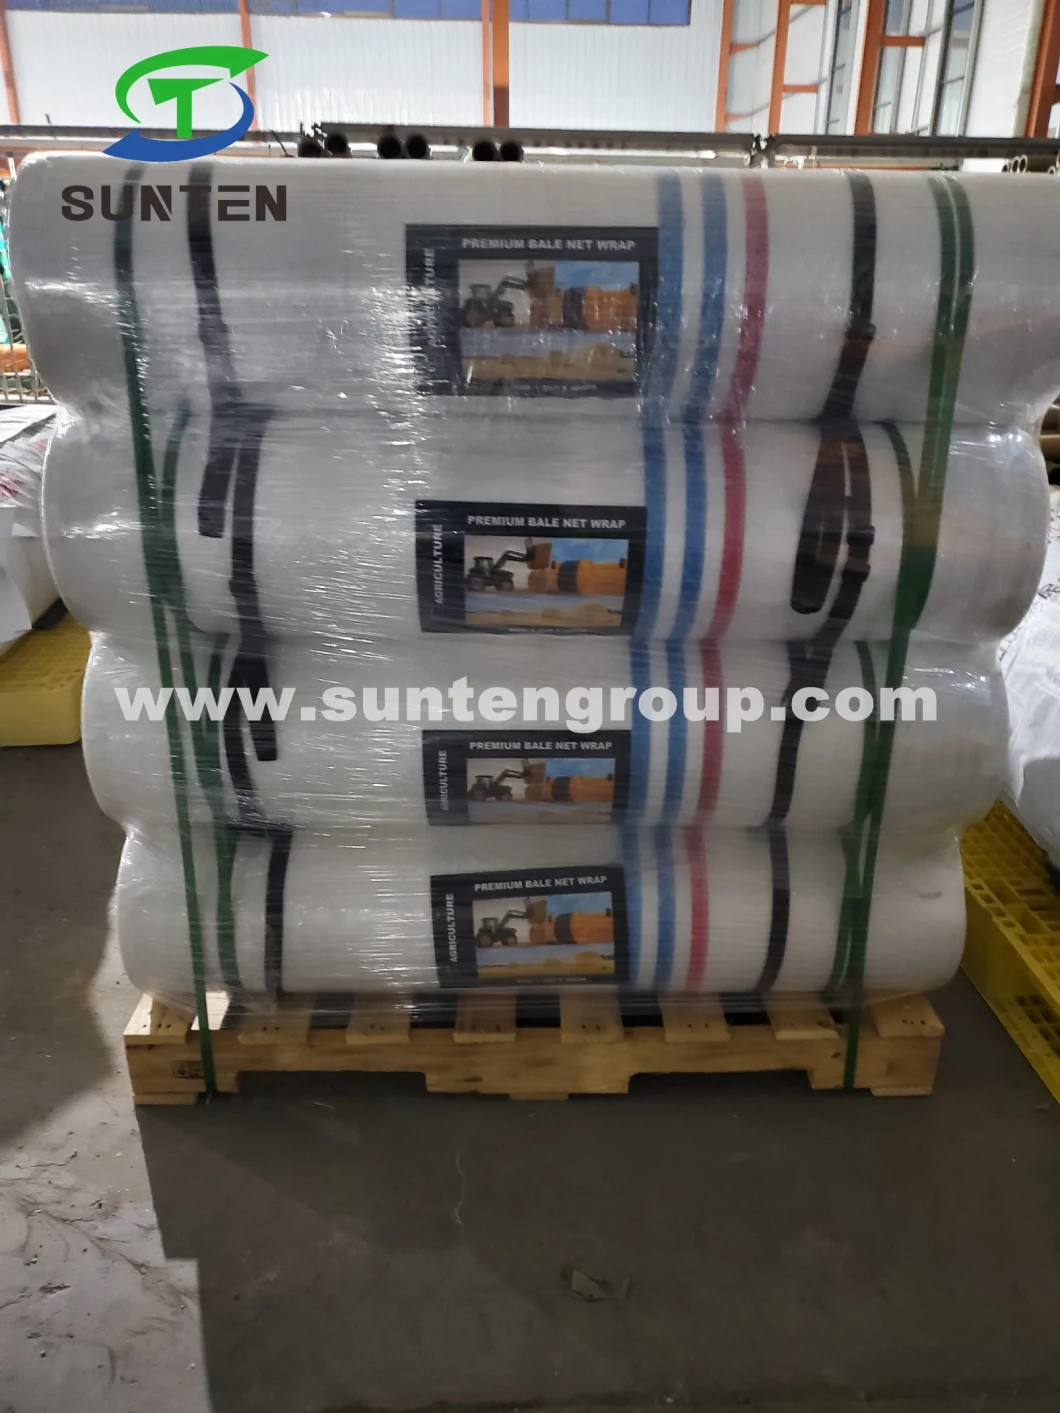 PE/Polyethylene/PP/Plastic/Agricultural White Packing Round Silage/Grass Hay Bale/Bales Wrap Net for Australia